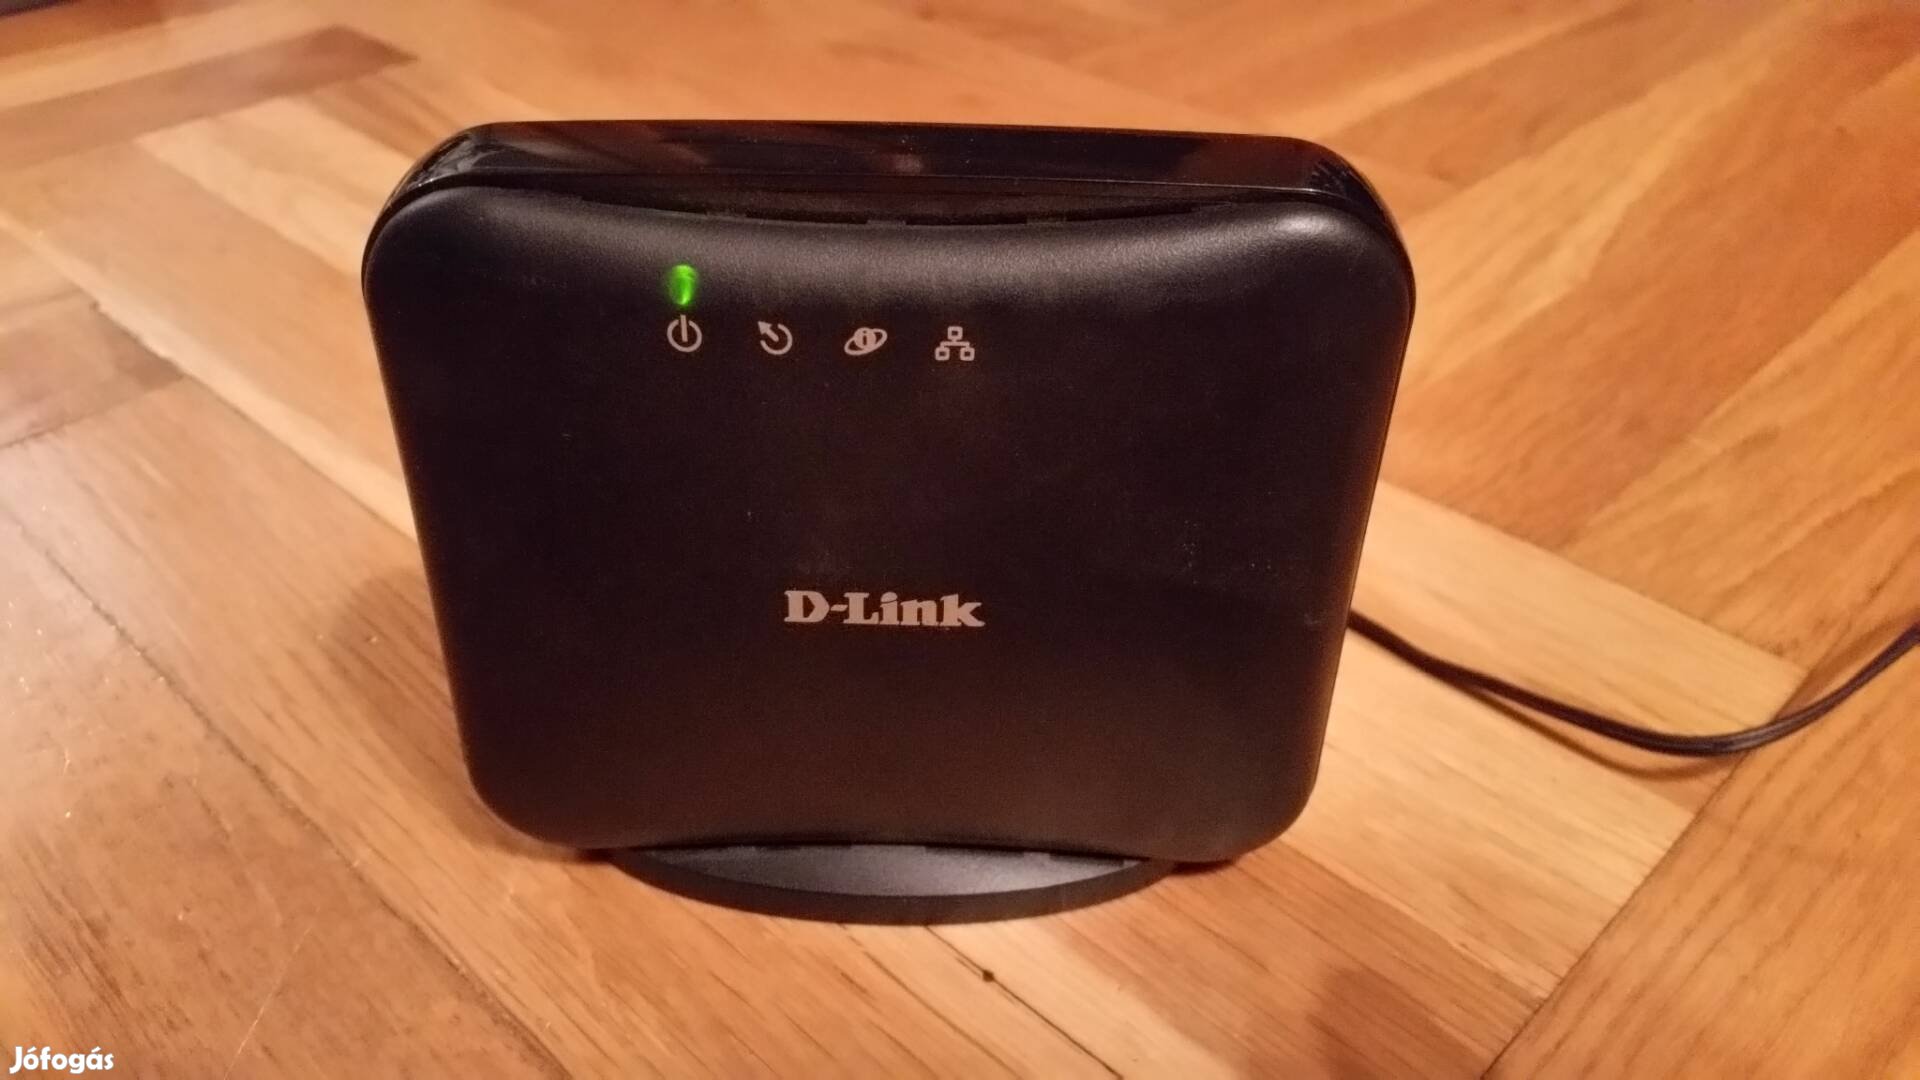 D-Link wifi router 